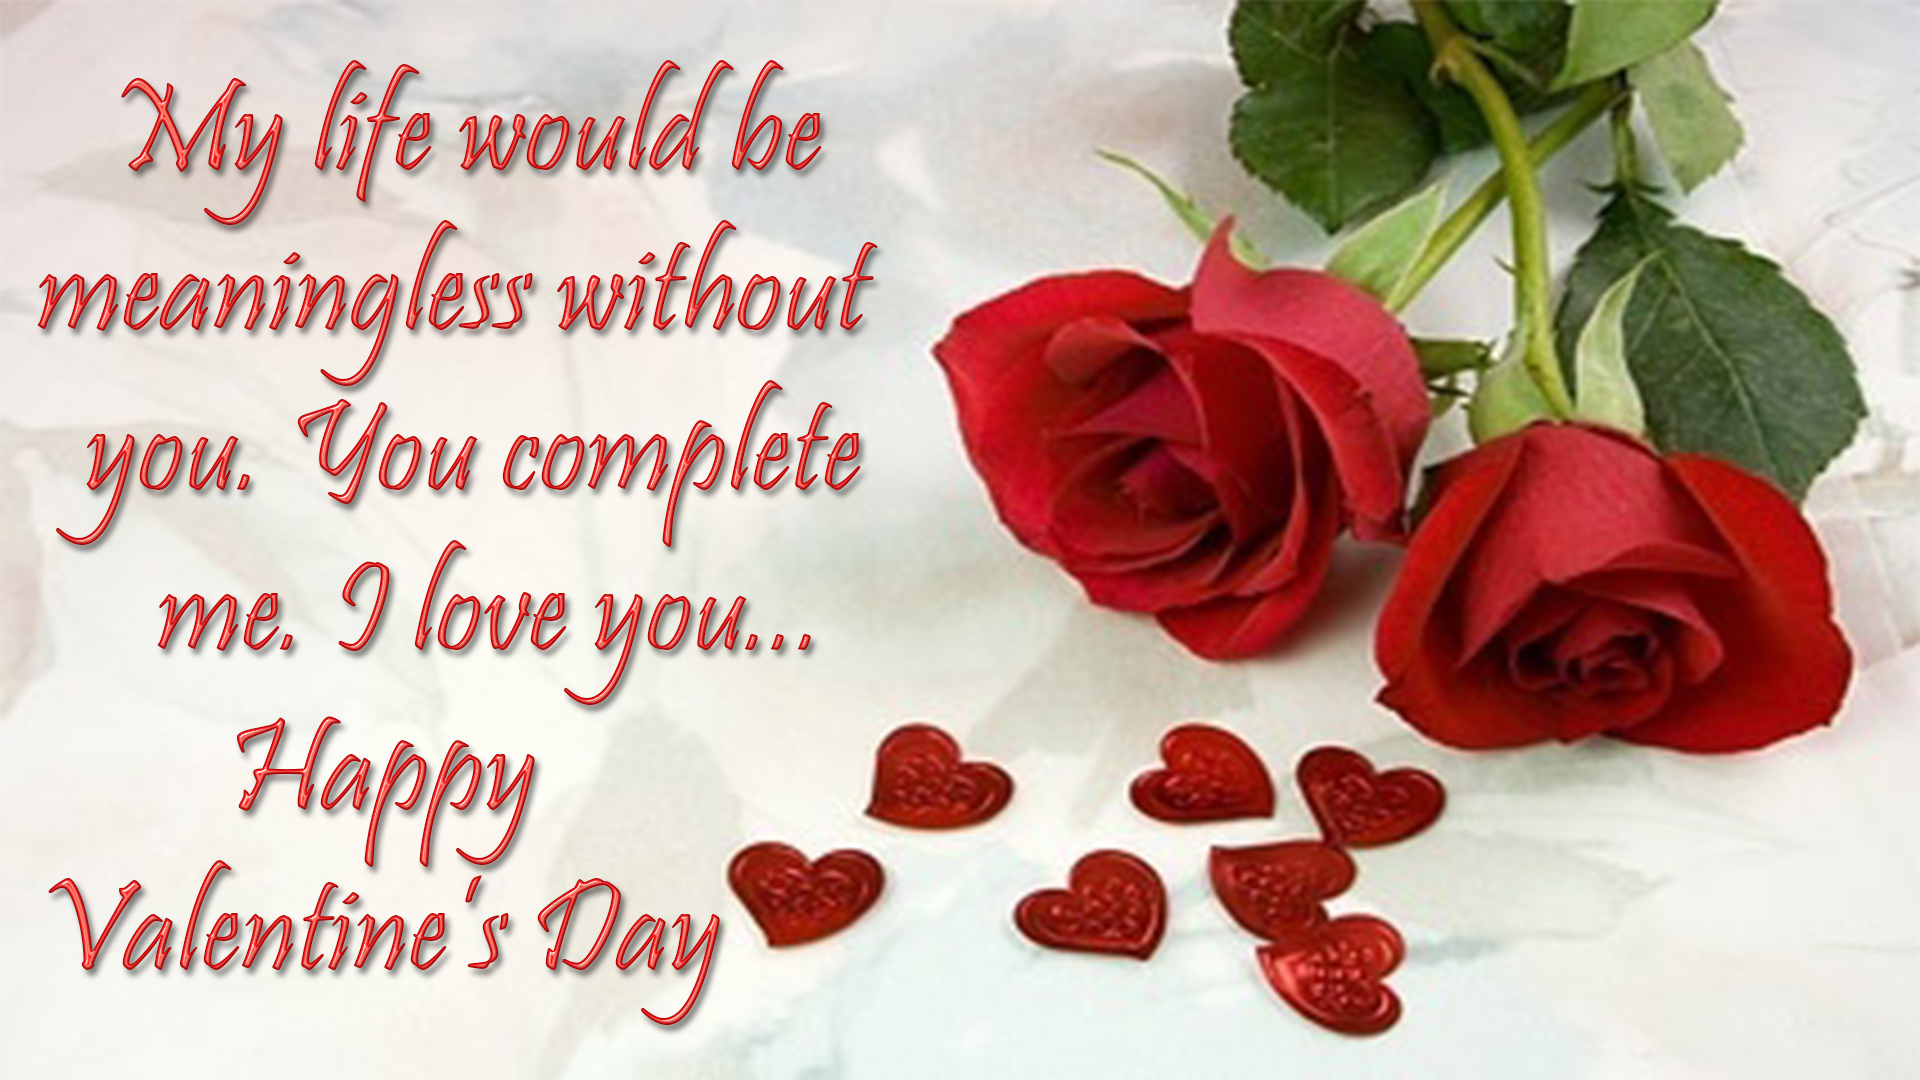 happy valentines day messages image